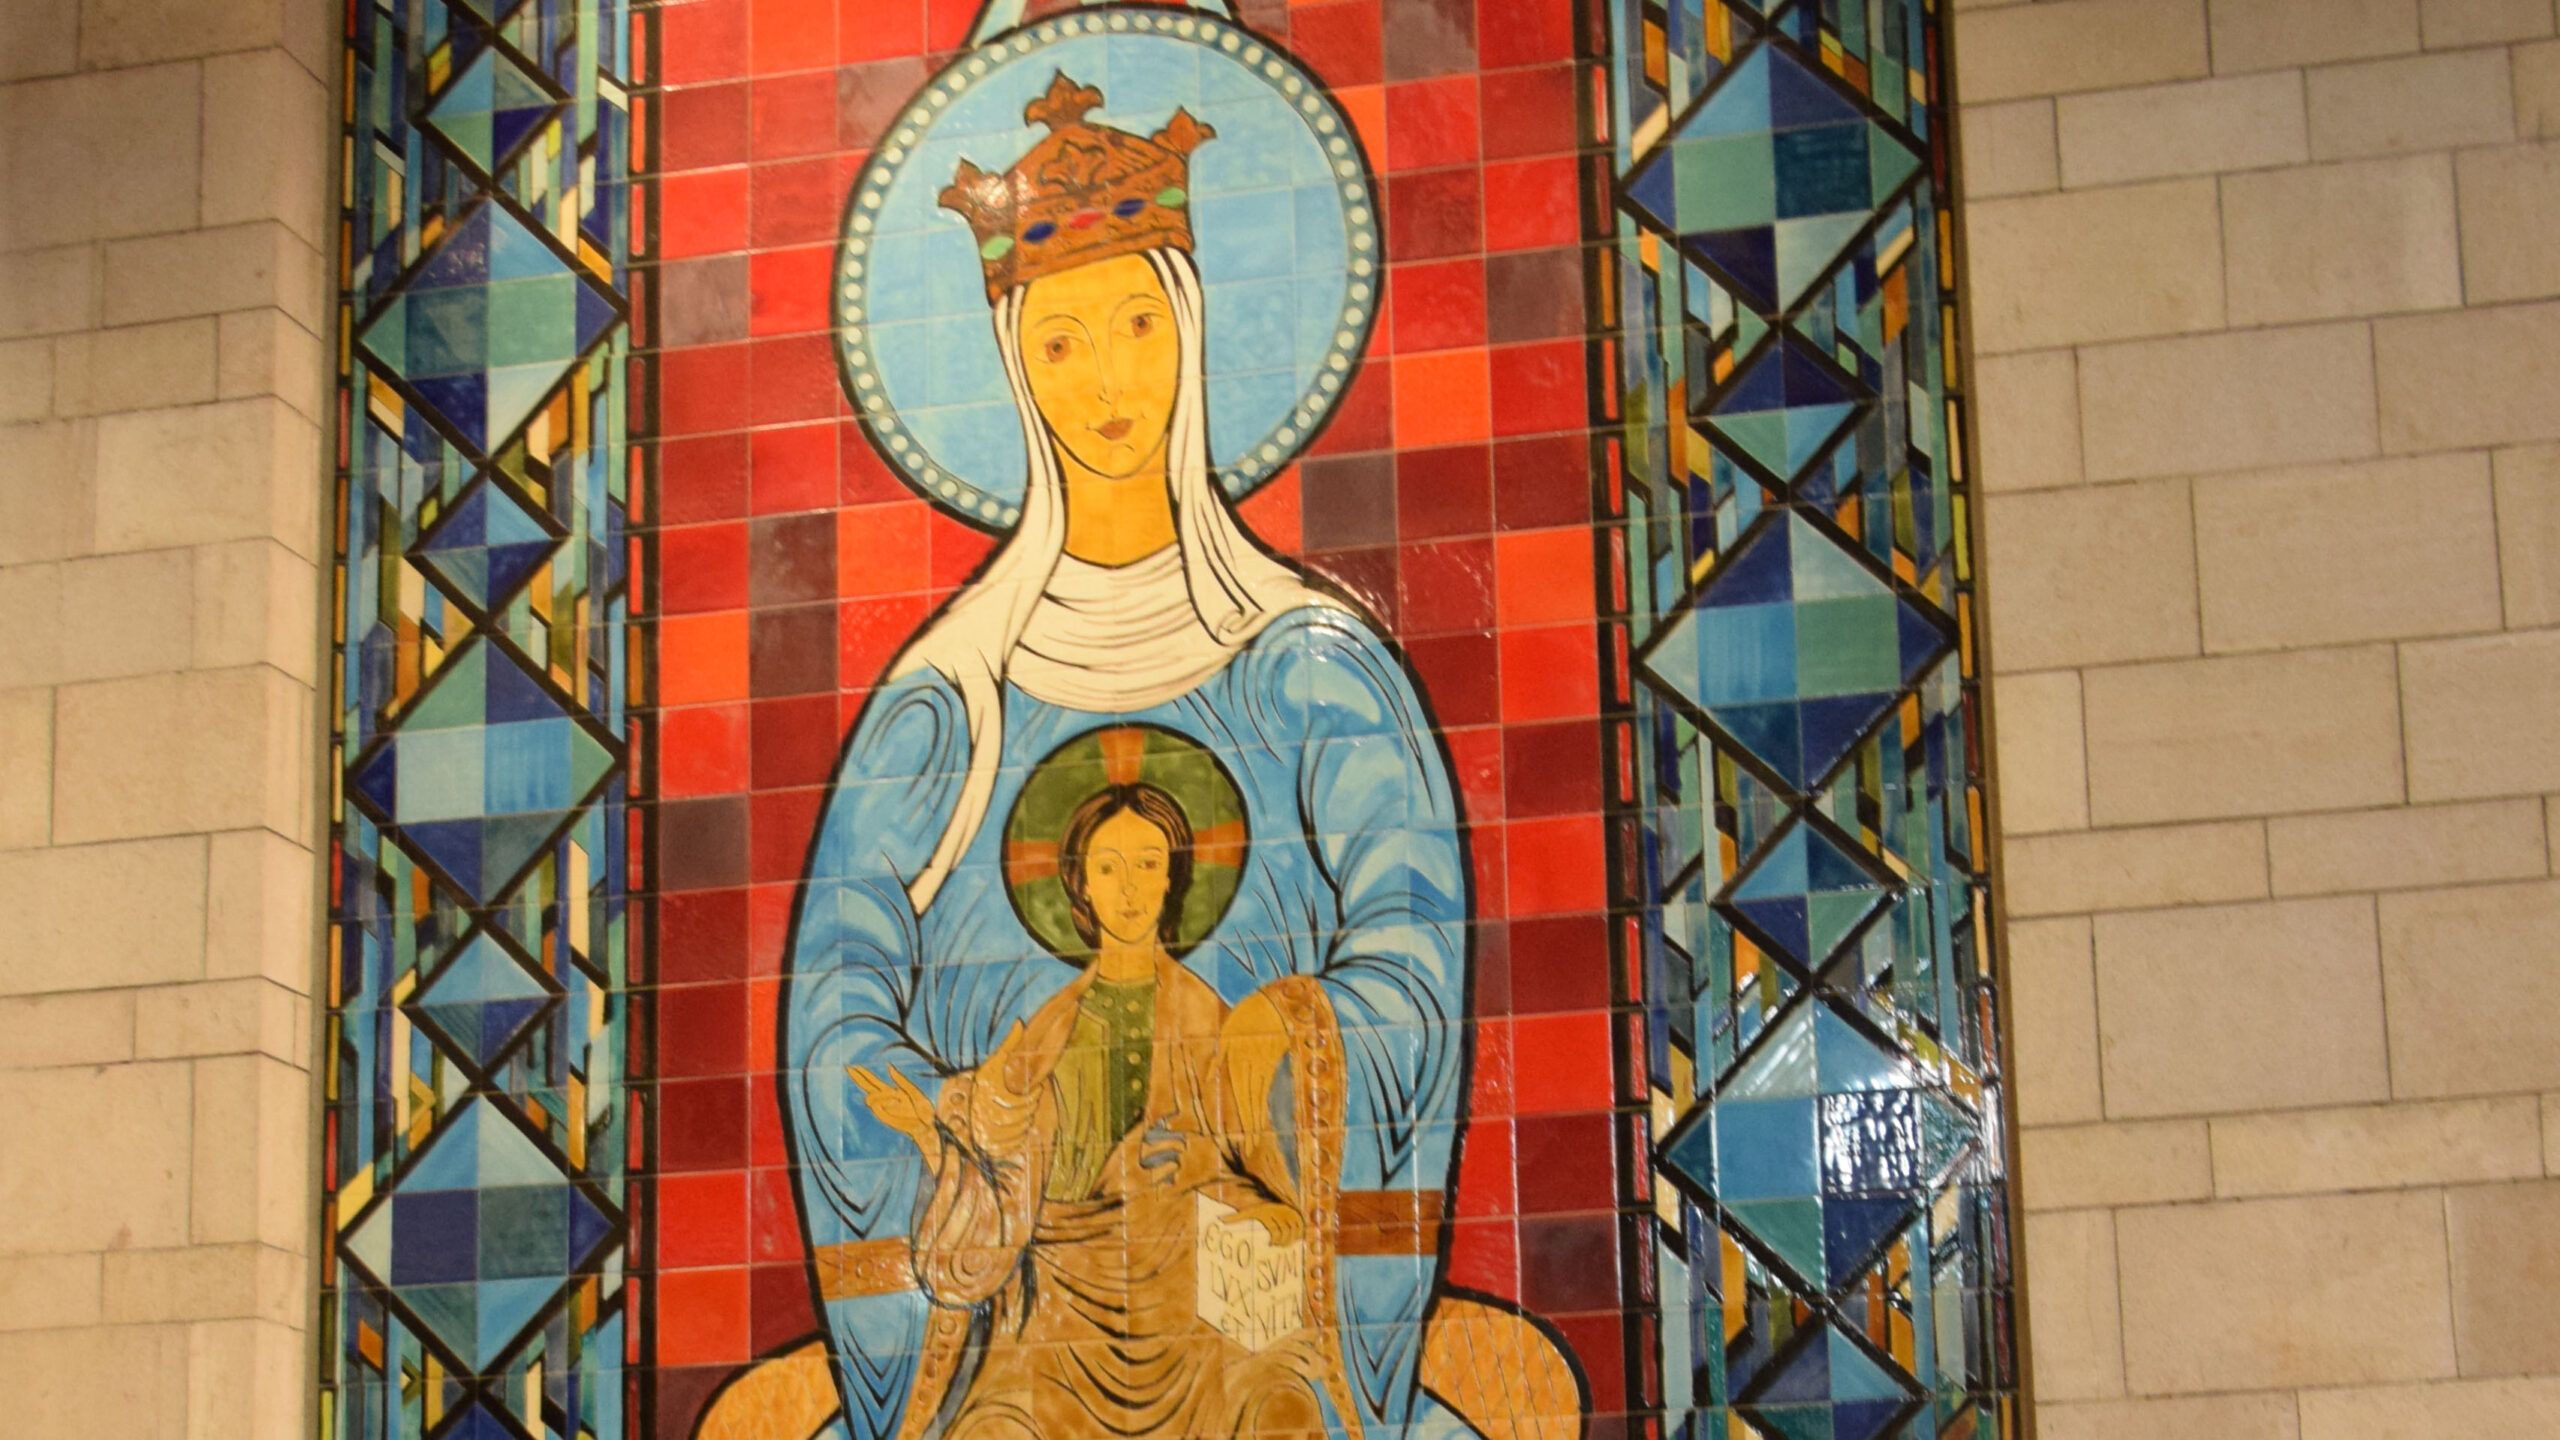 Mary and Jesus at the Church of the Annunciation, Photo credit: Brooke Obie